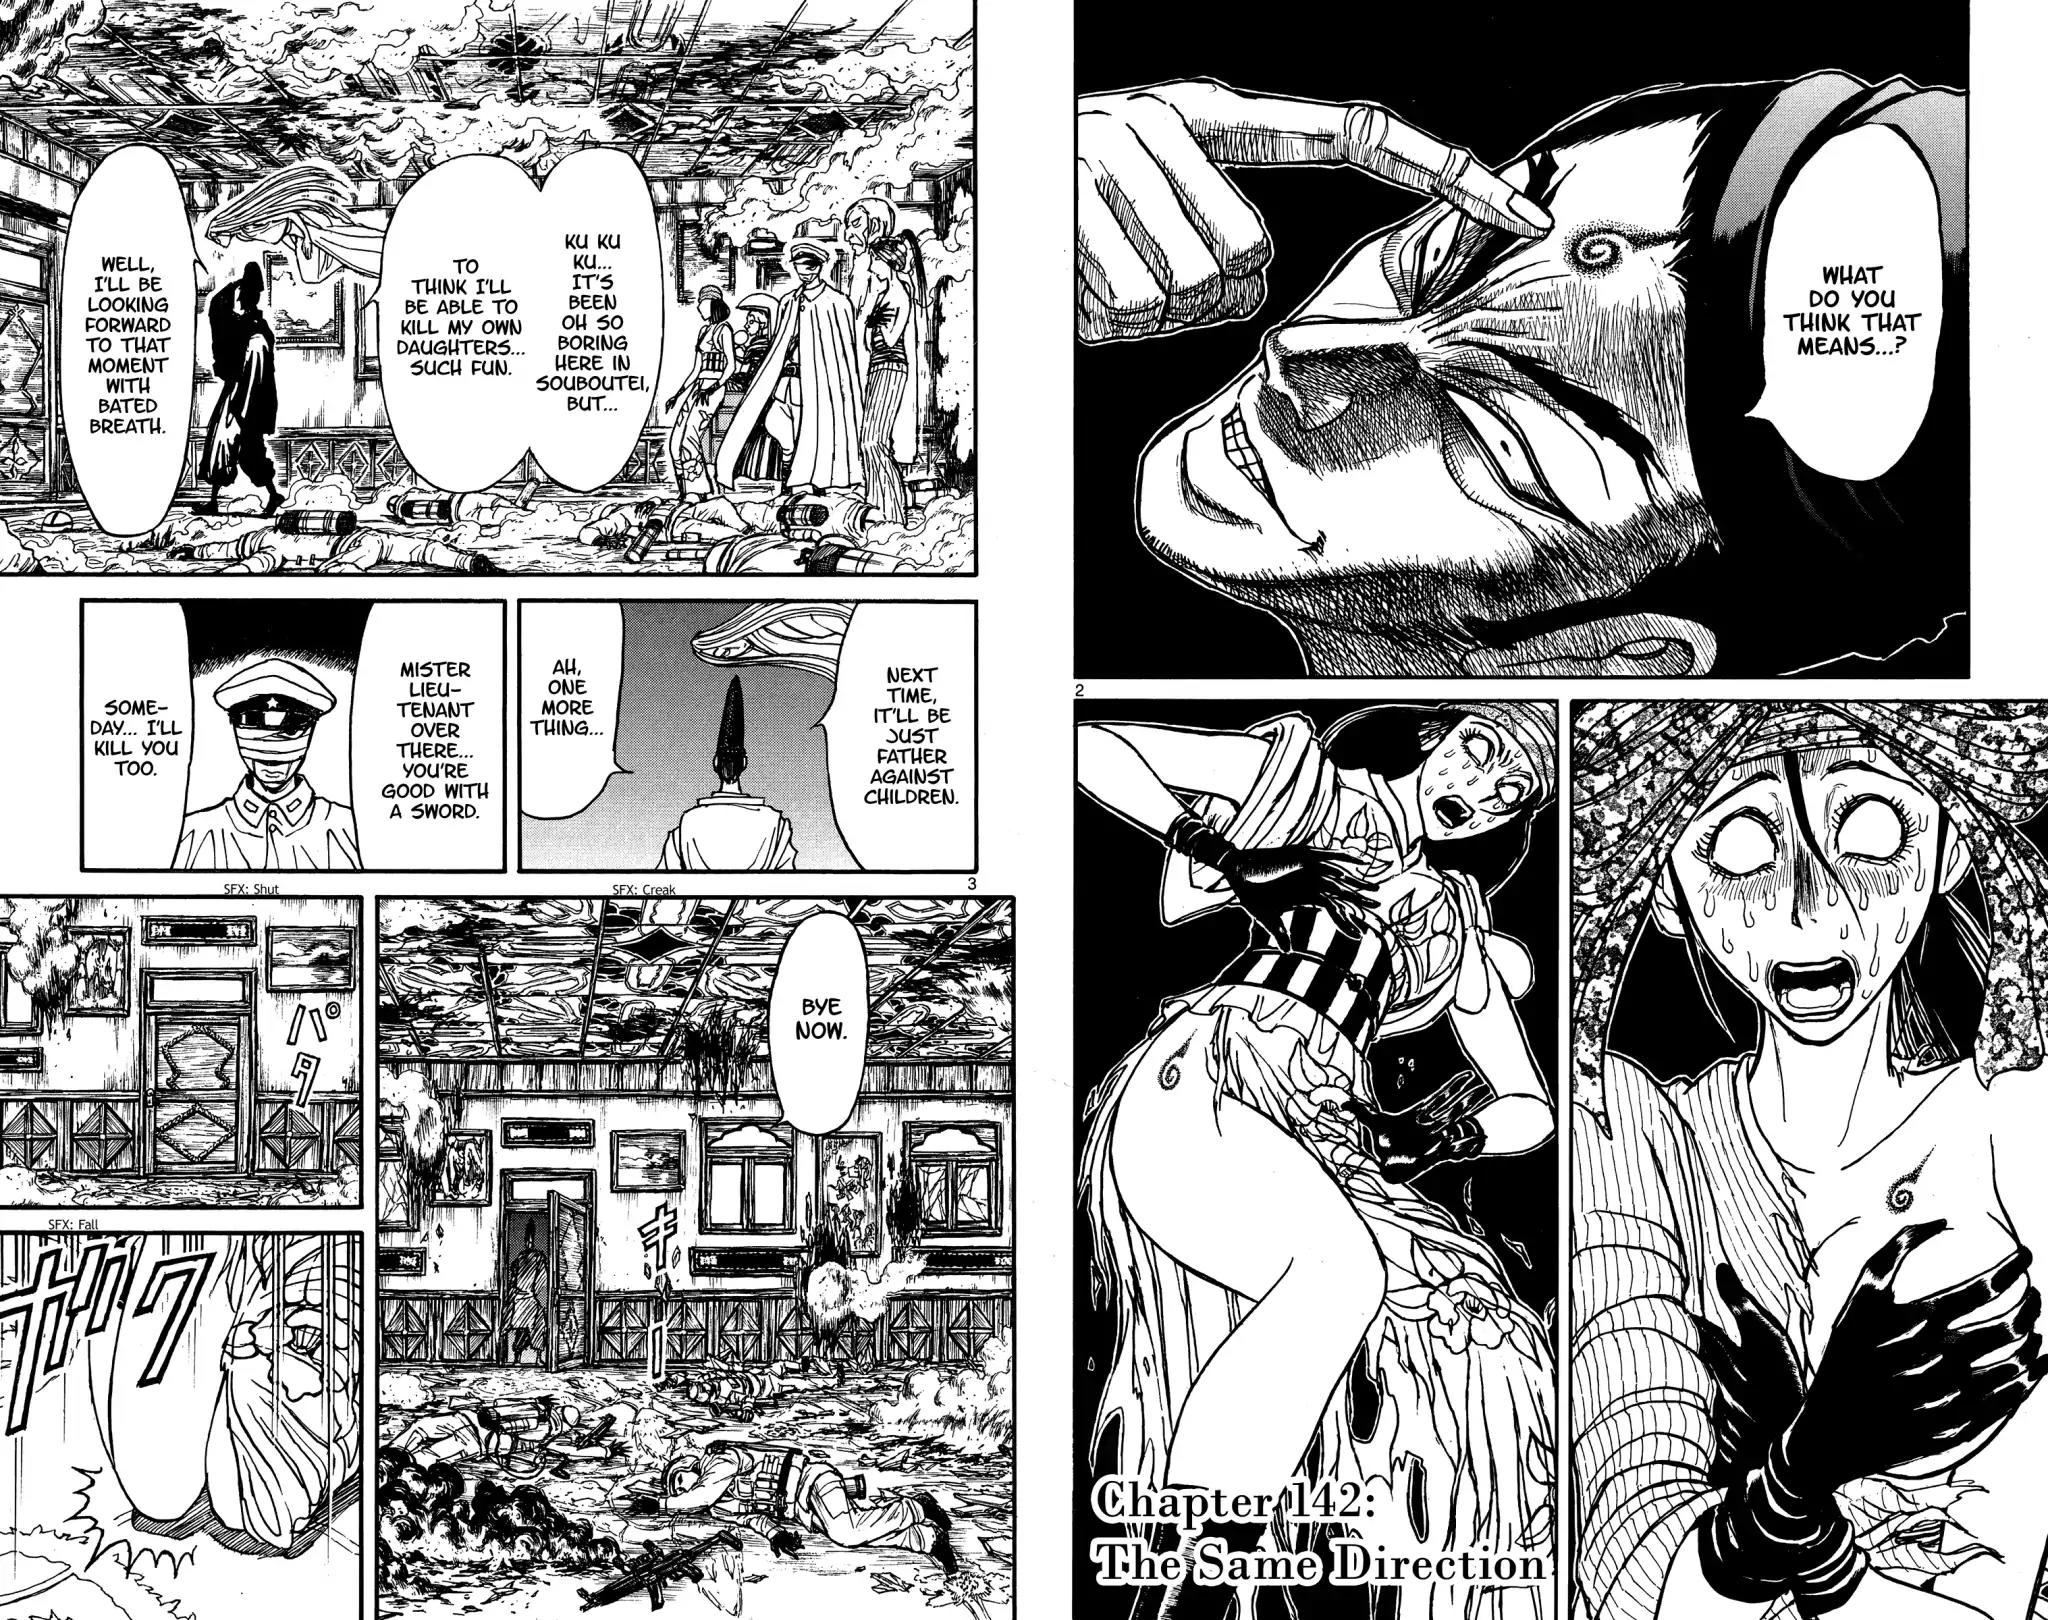 Souboutei Must Be Destroyed Chapter 142: